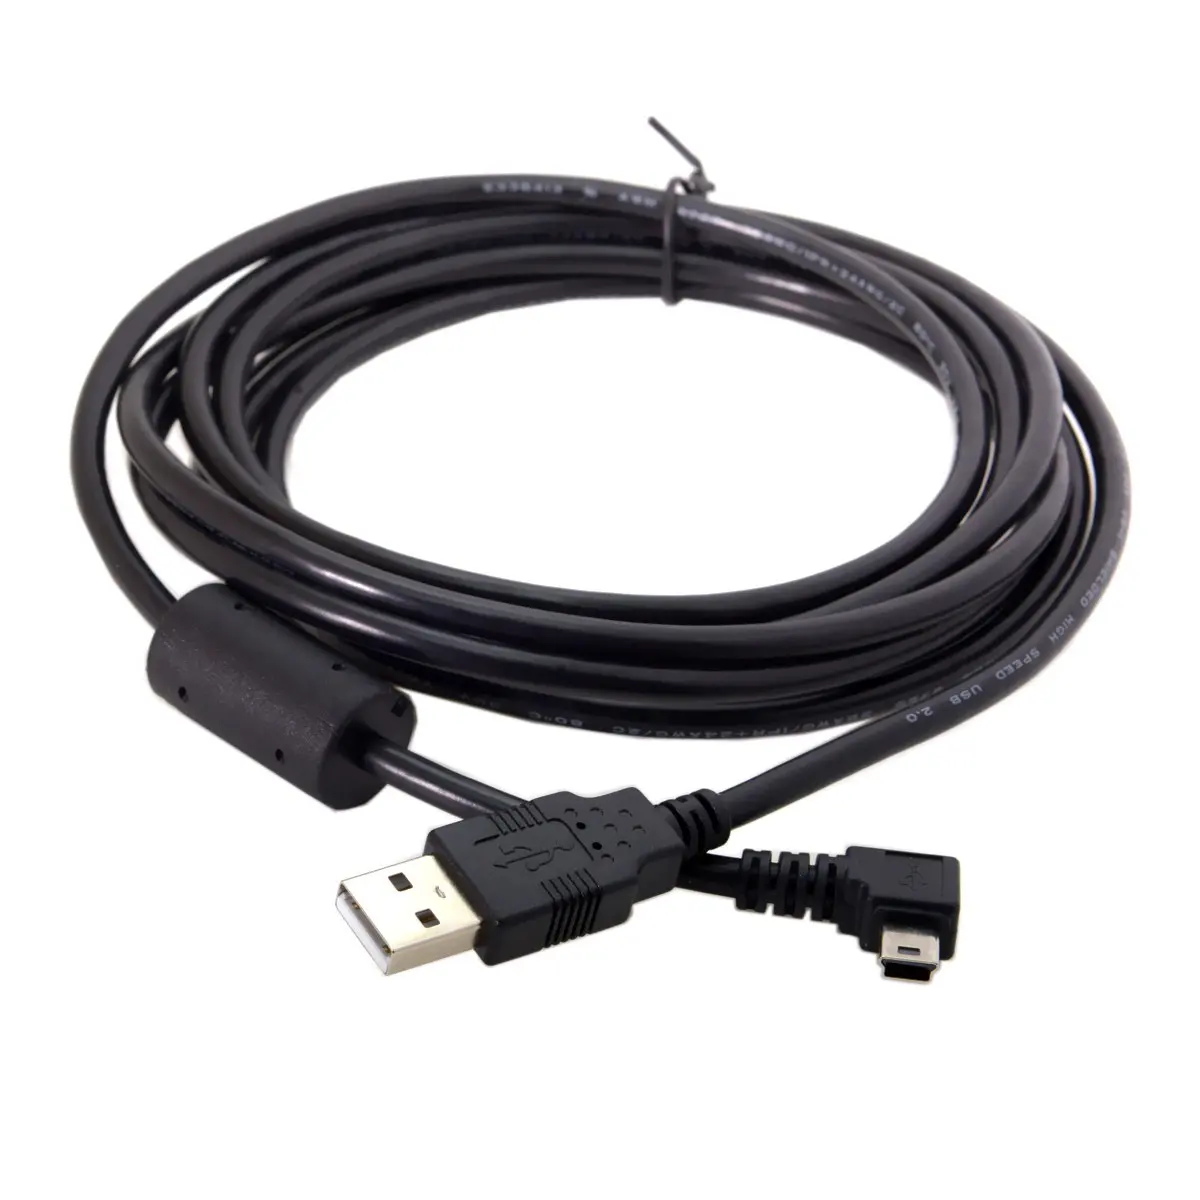 

Chenyang Type B Mini USB 5pin Male to USB 2.0 Male Data Cable with Ferrite 5m 3m 1.8m 0.5m Right Angled Up Down anled 90 Degree